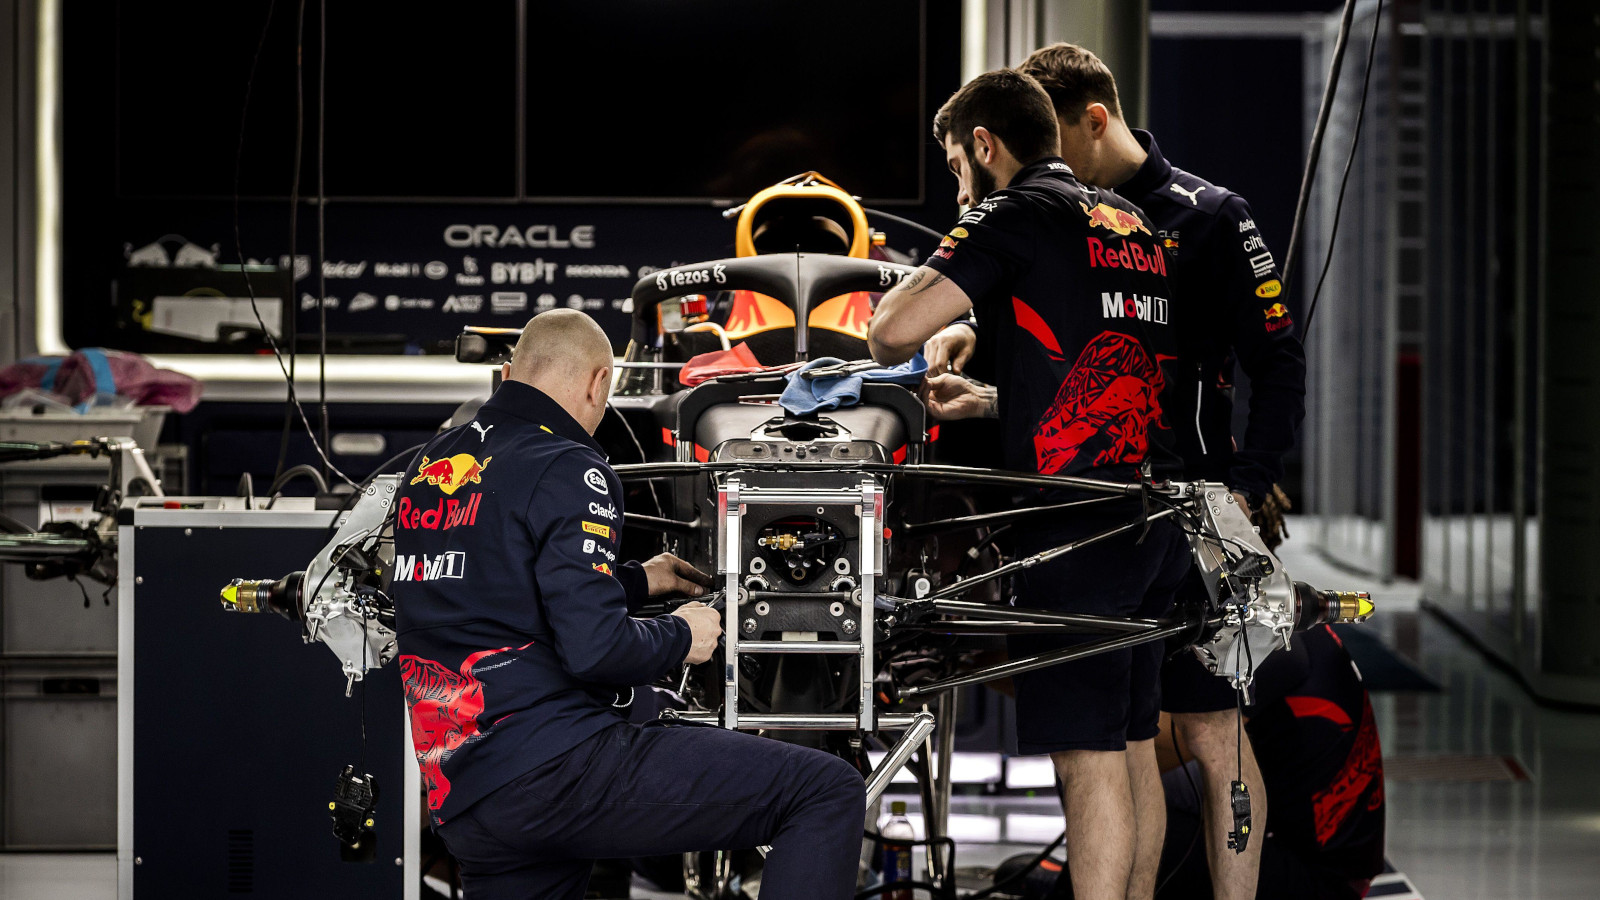 Red Bull working on Max Verstappen's RB18. Imola April 2022